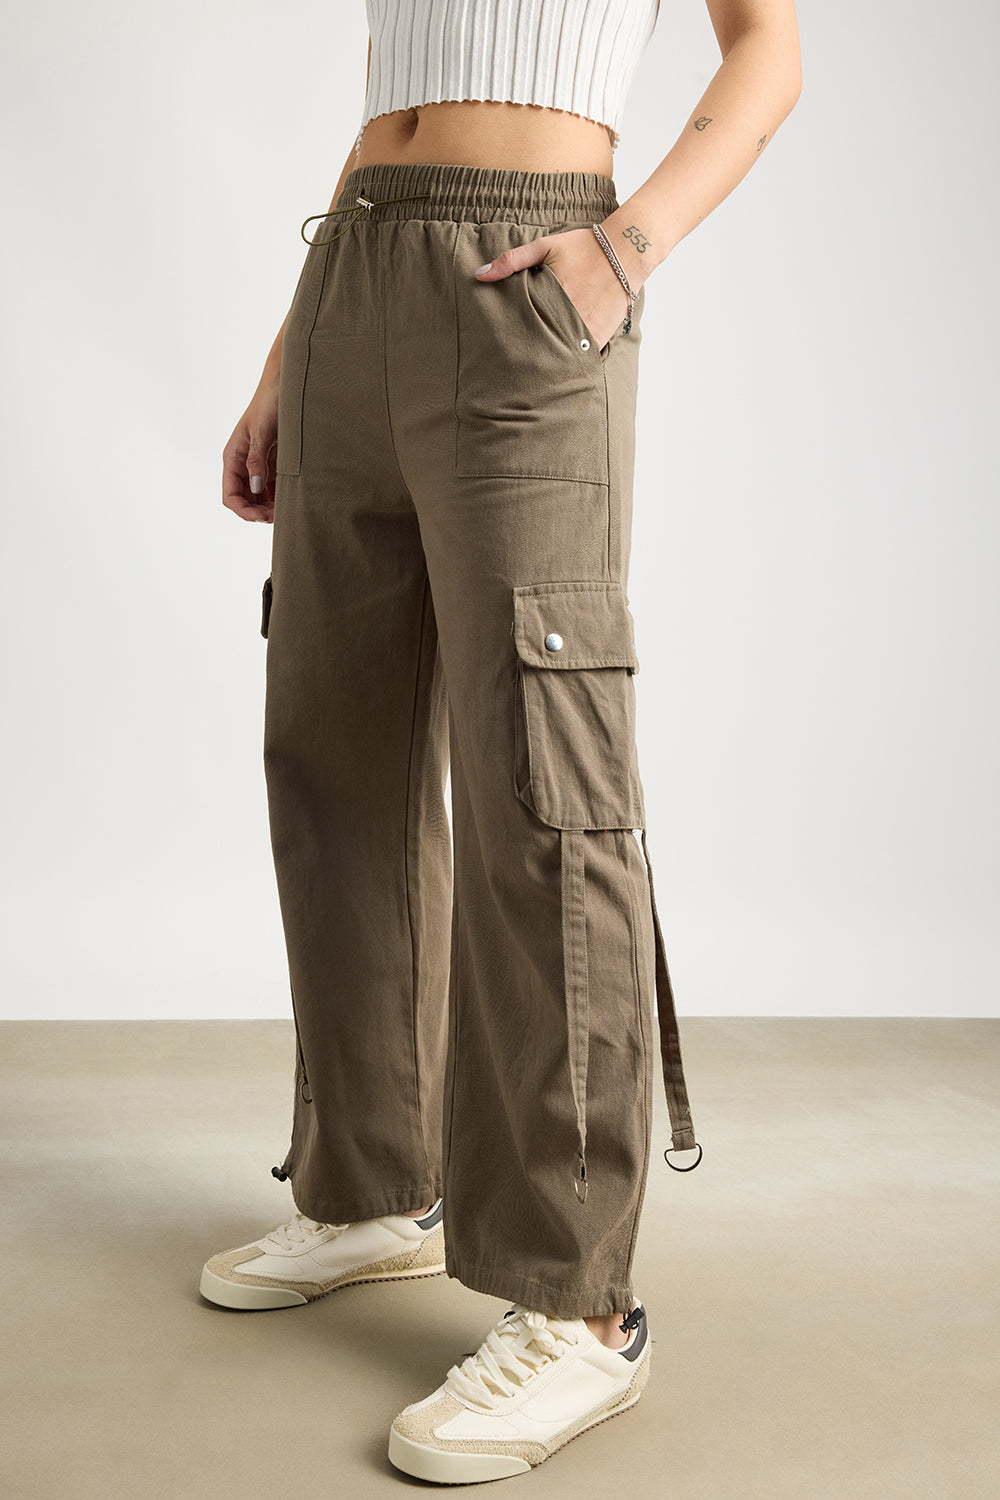 Shop for Cargo Pants for Women Online Starting @ ₹999 – Page 2